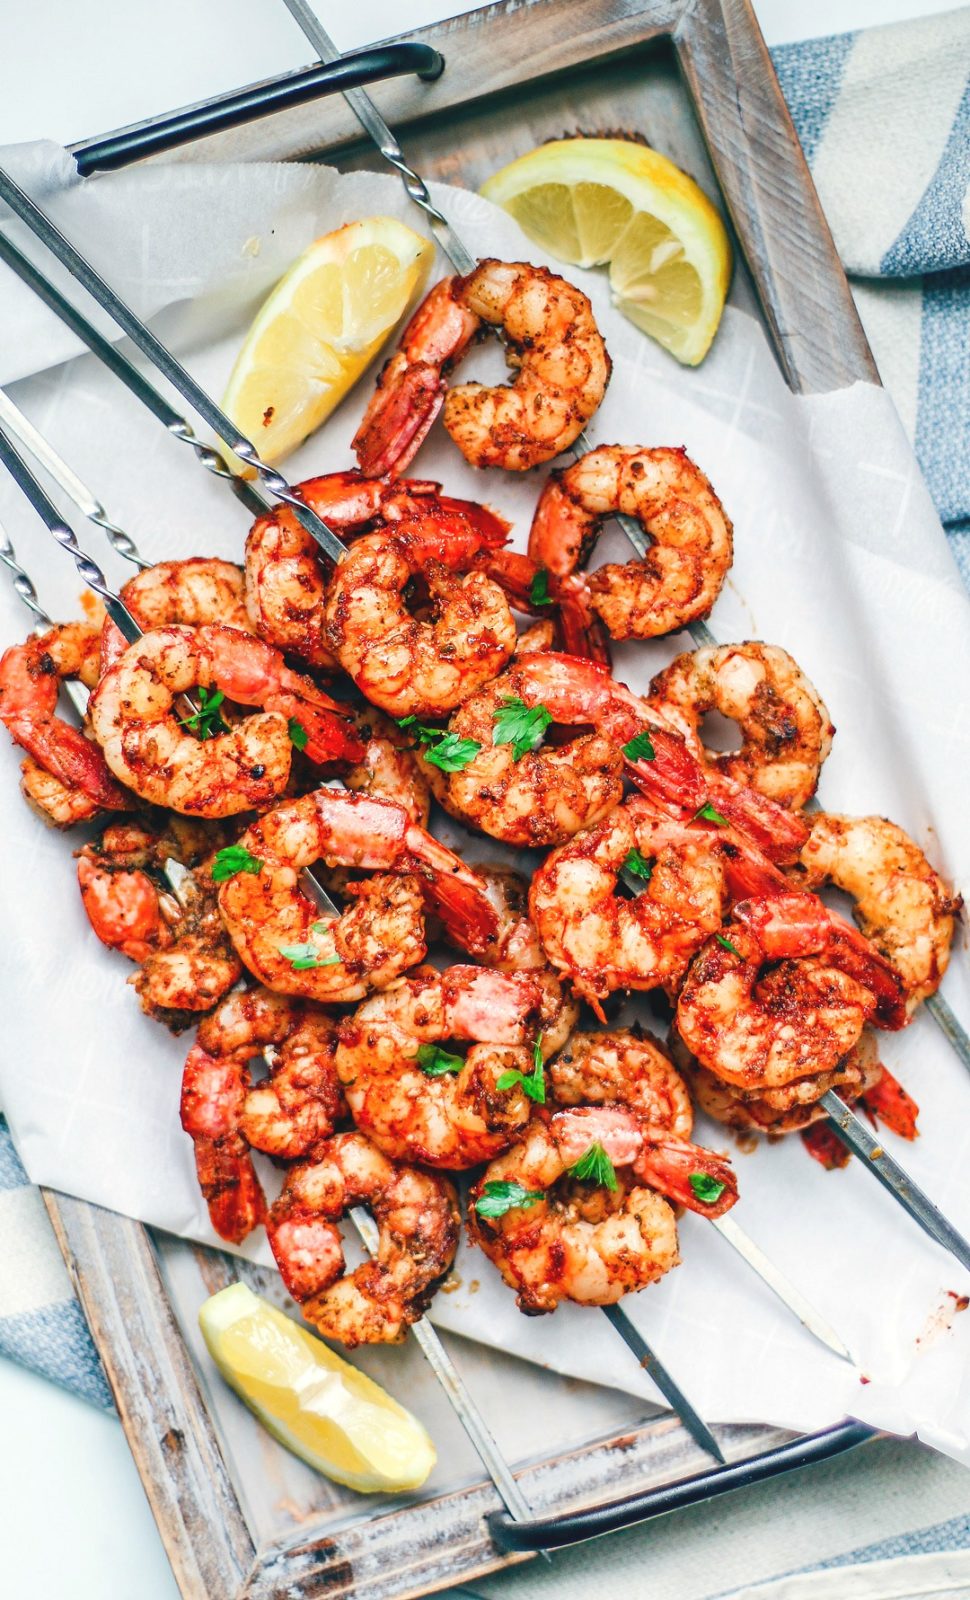 Tray of grilled shrimp skewers with lemon wedges.